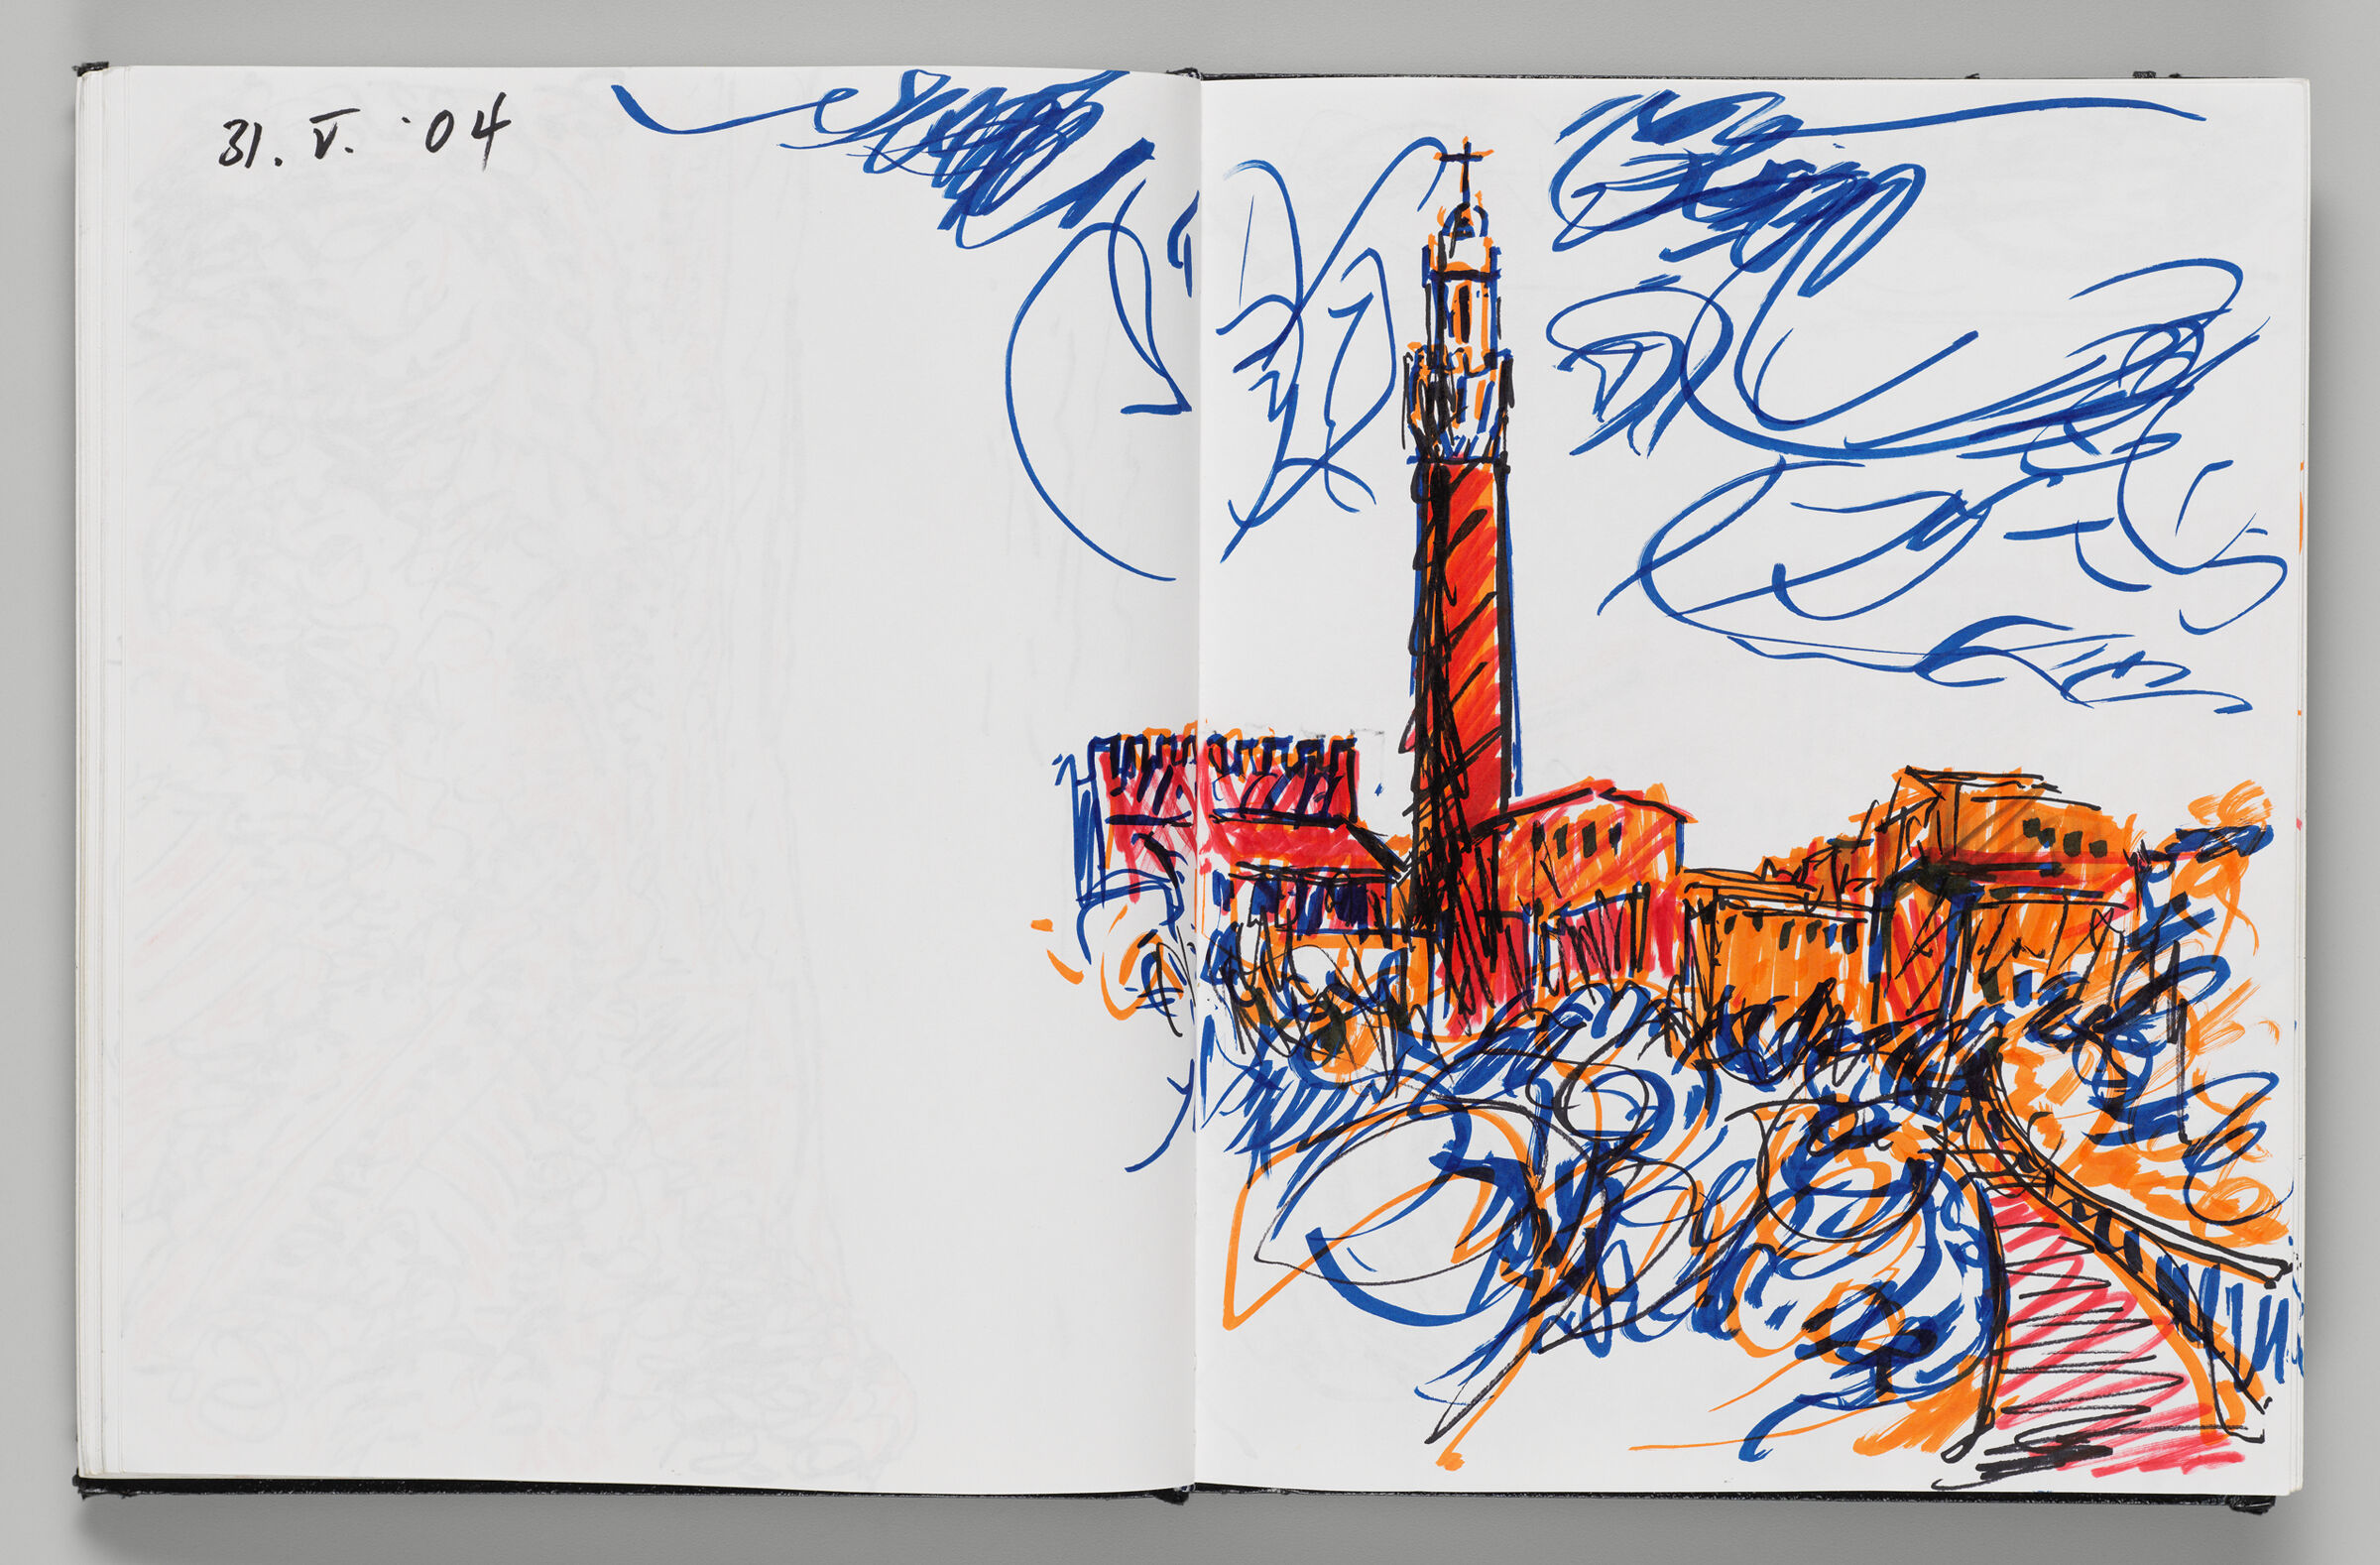 Untitled (Bleed-Through Of Previous Page And Sketch Of Siena, Two-Page Spread)